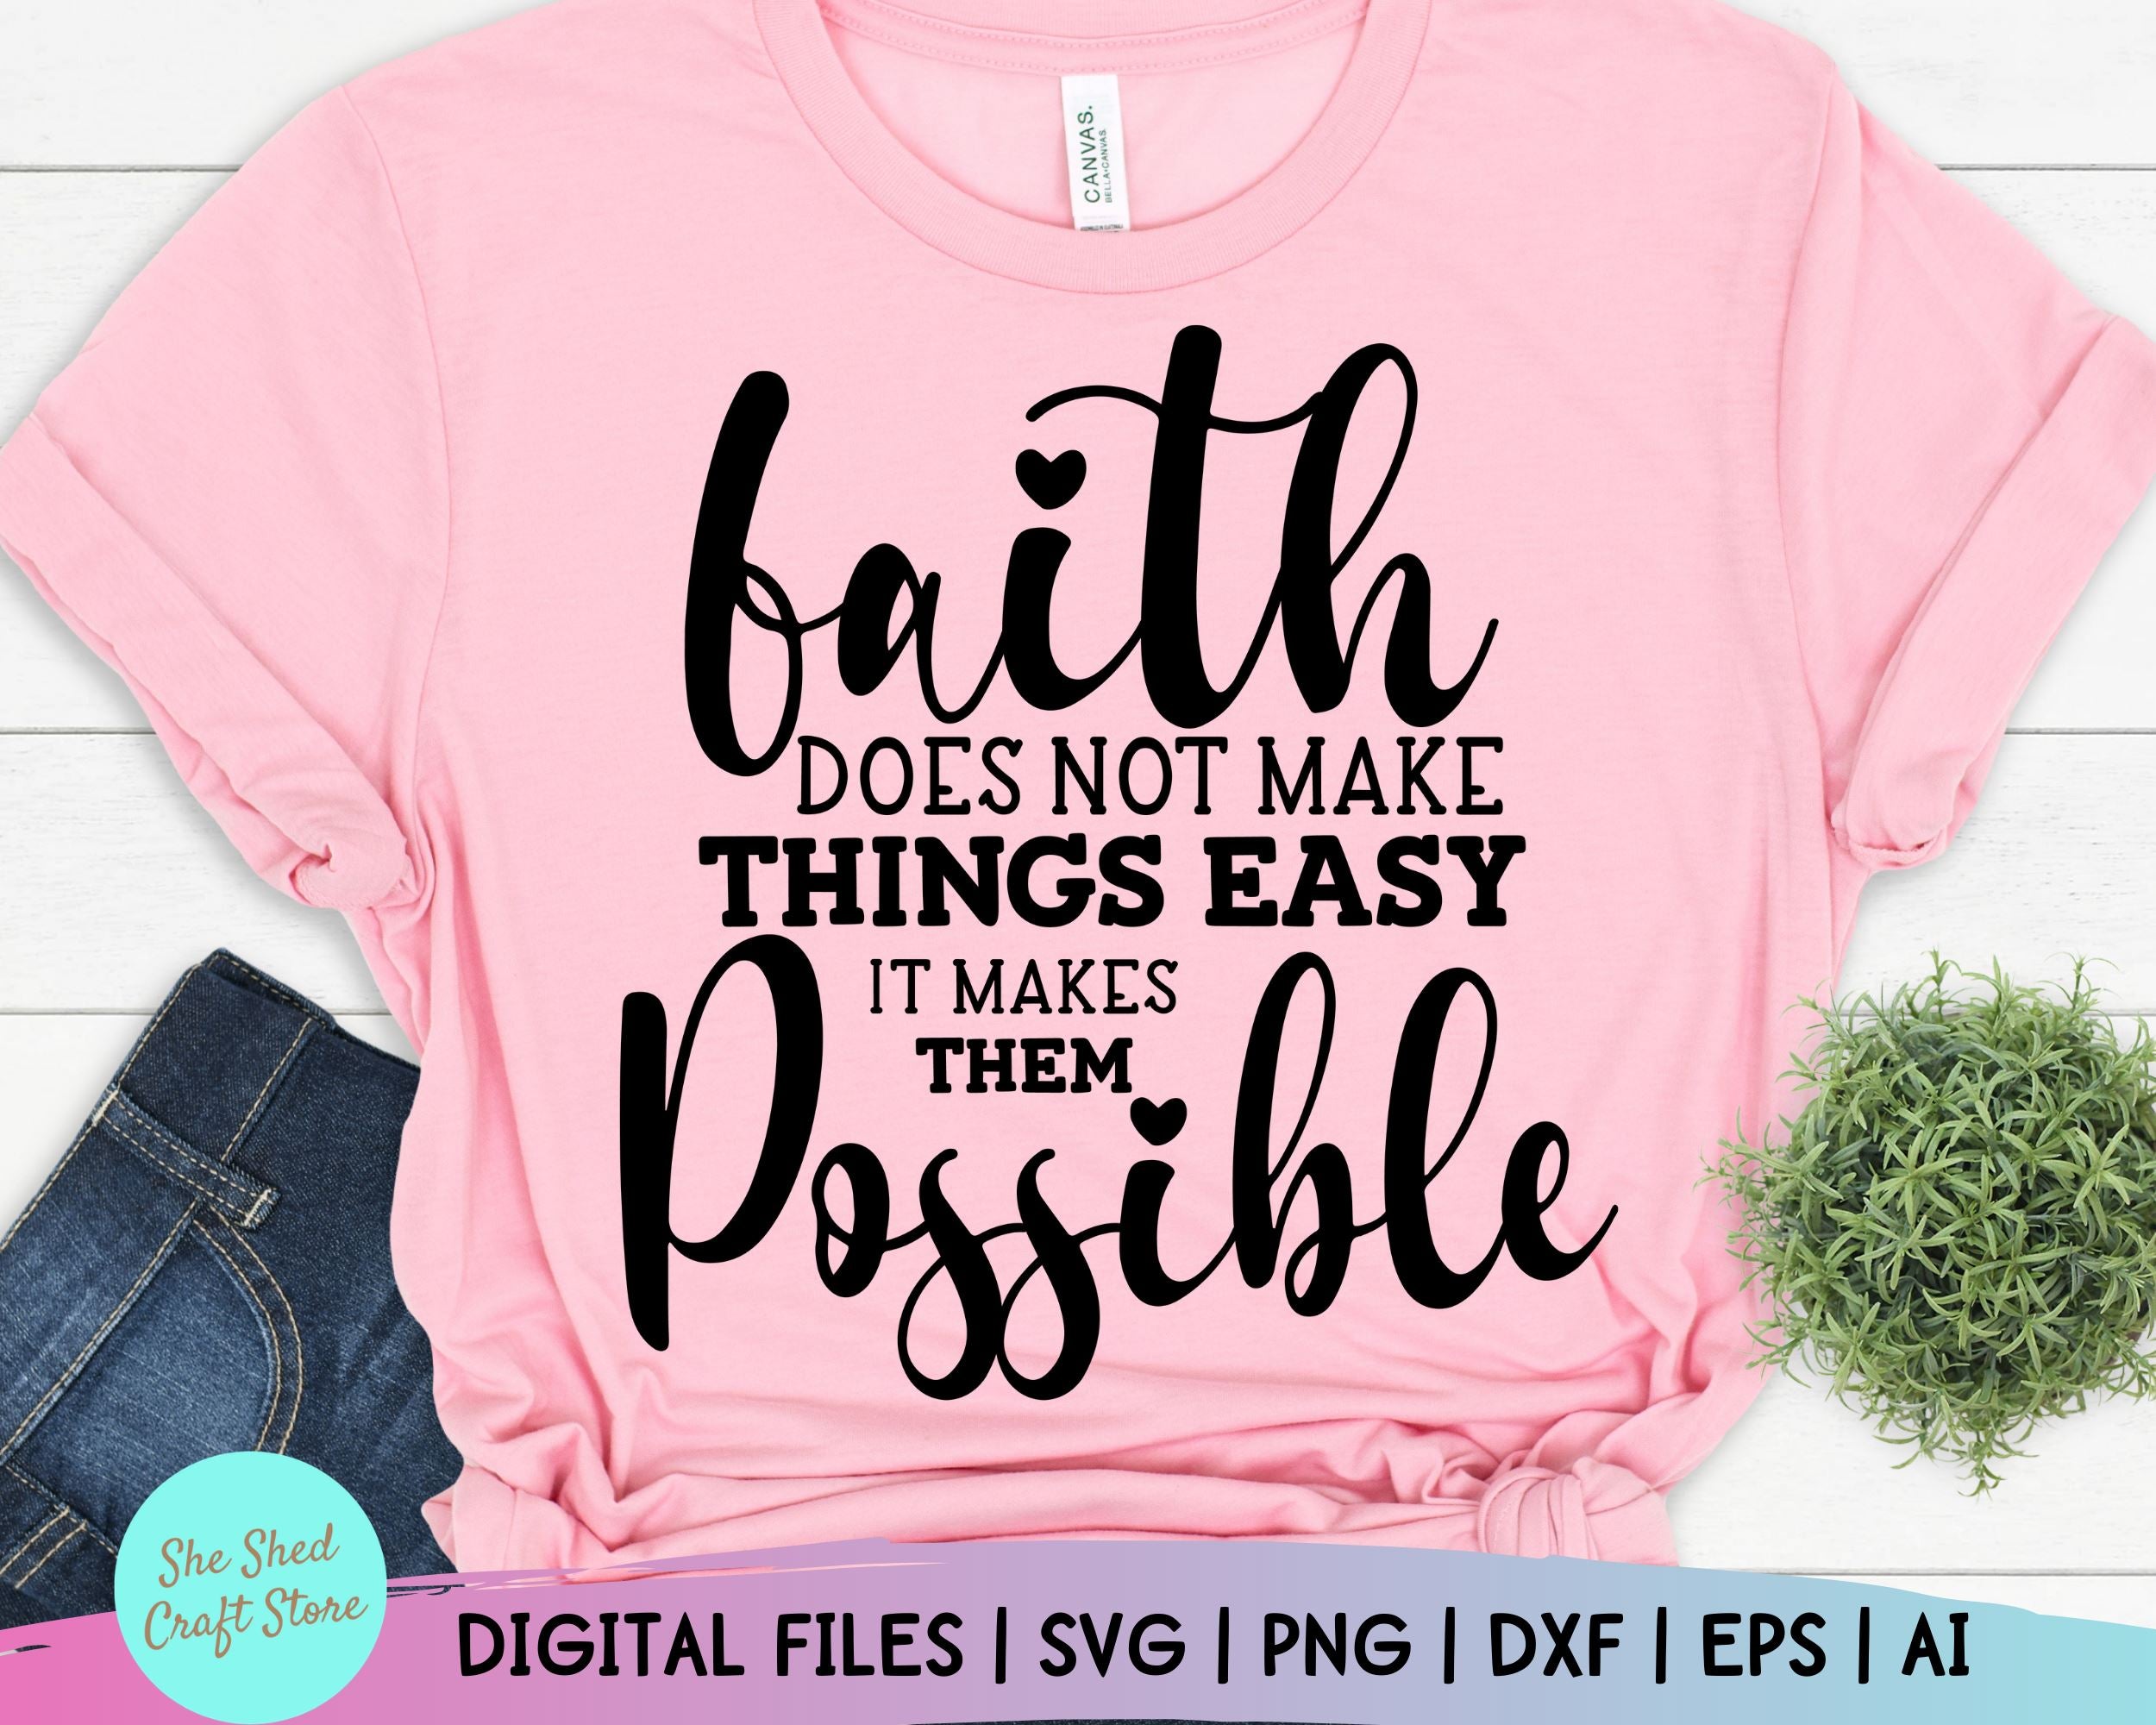 Cricut Shirt Ideas to Inspire You (Free Files)! - Leap of Faith Crafting